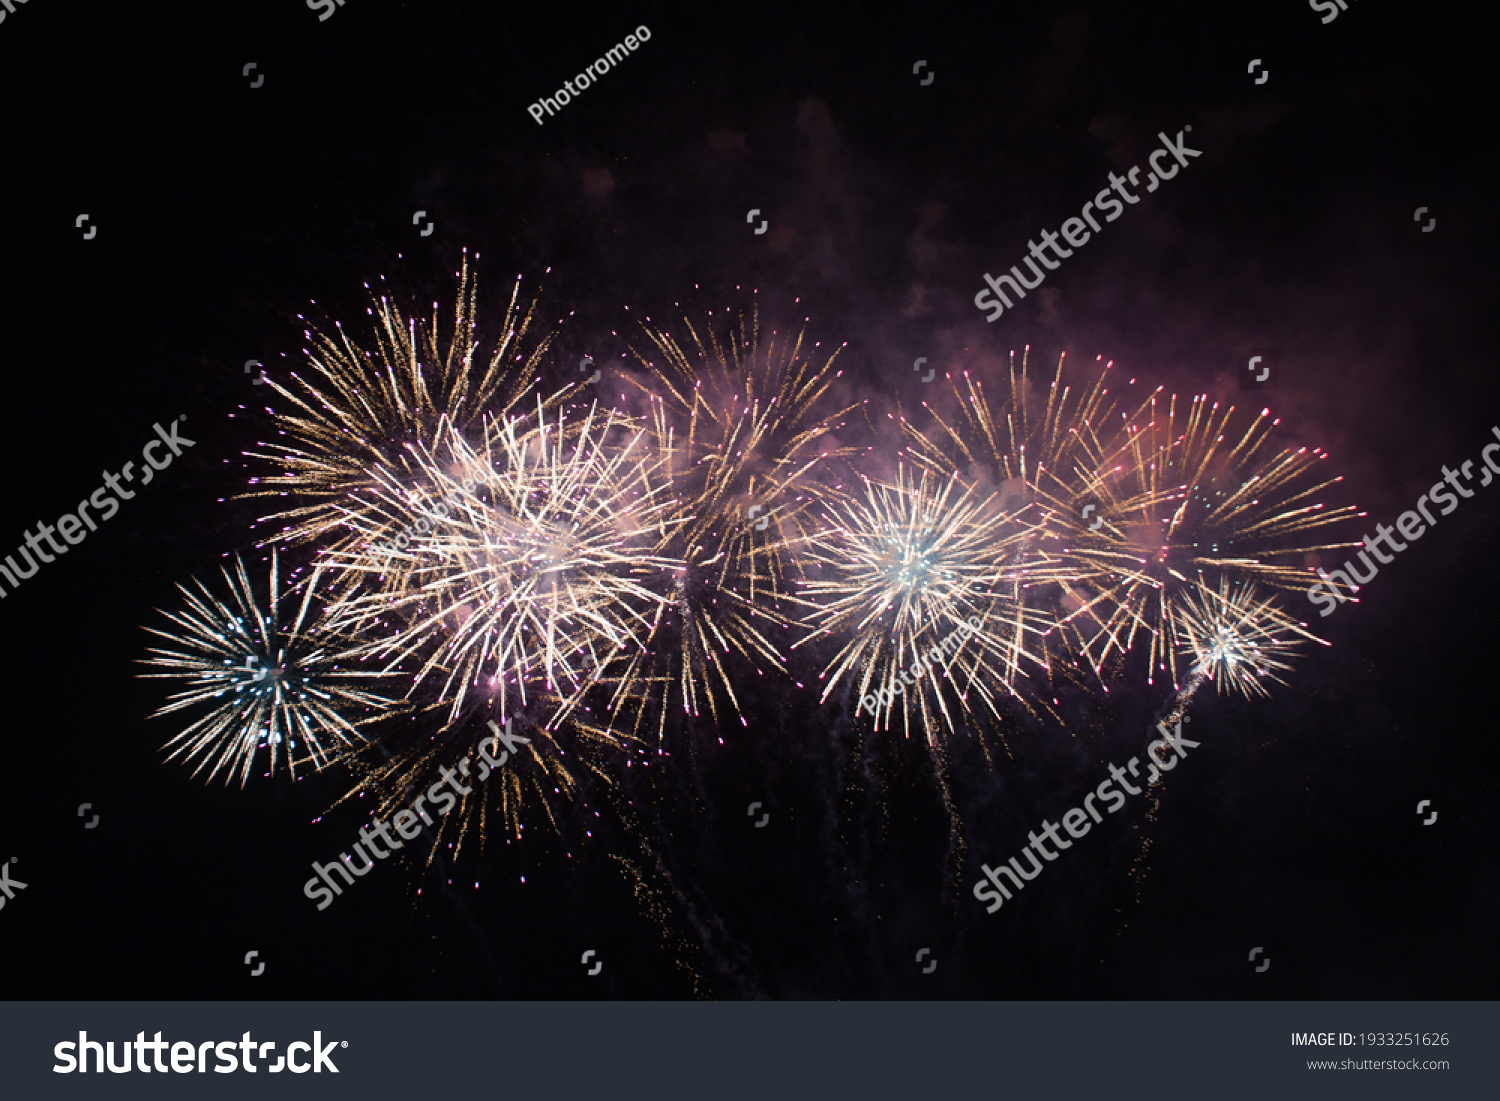 Fireworks in the new year festival #1933251626